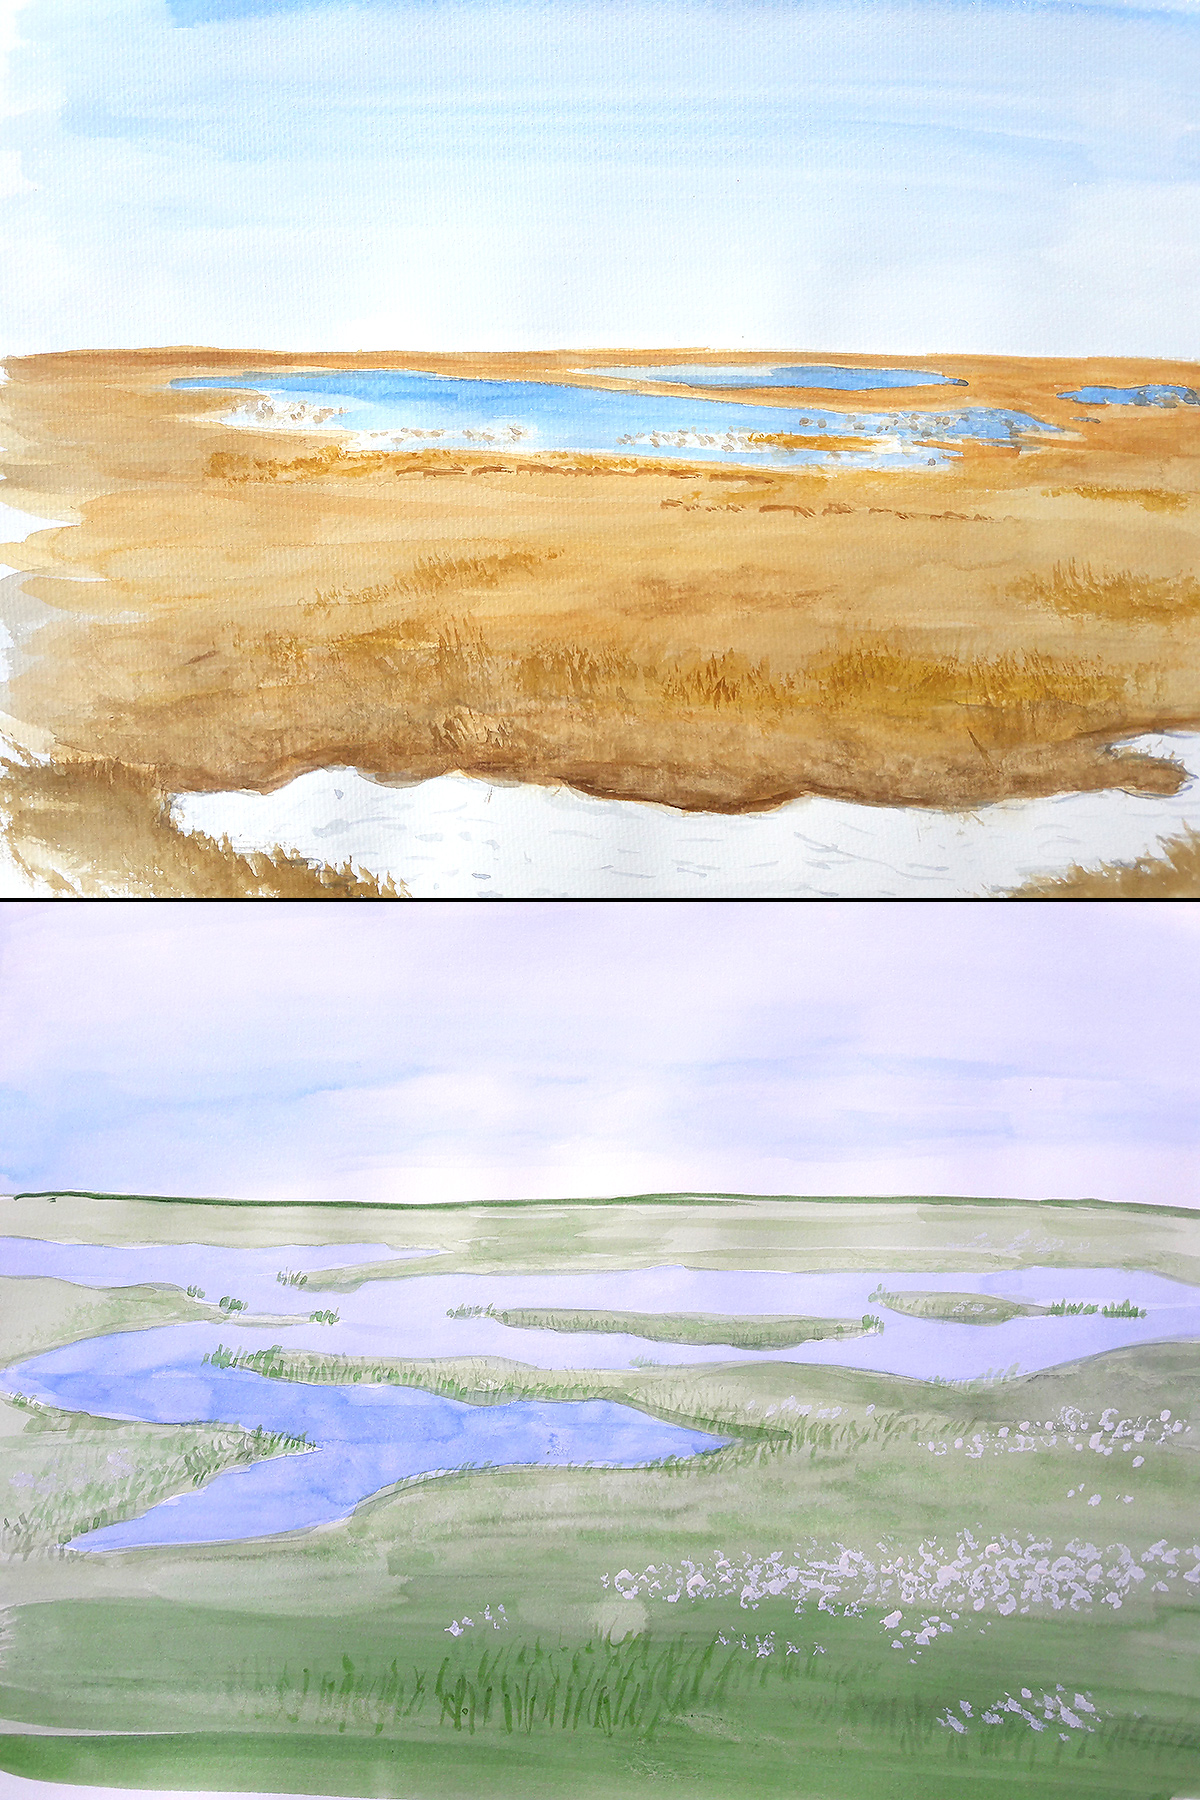 Tundra after snowmelt (June) and at height of summer (August). (Louis-Jean Germain)